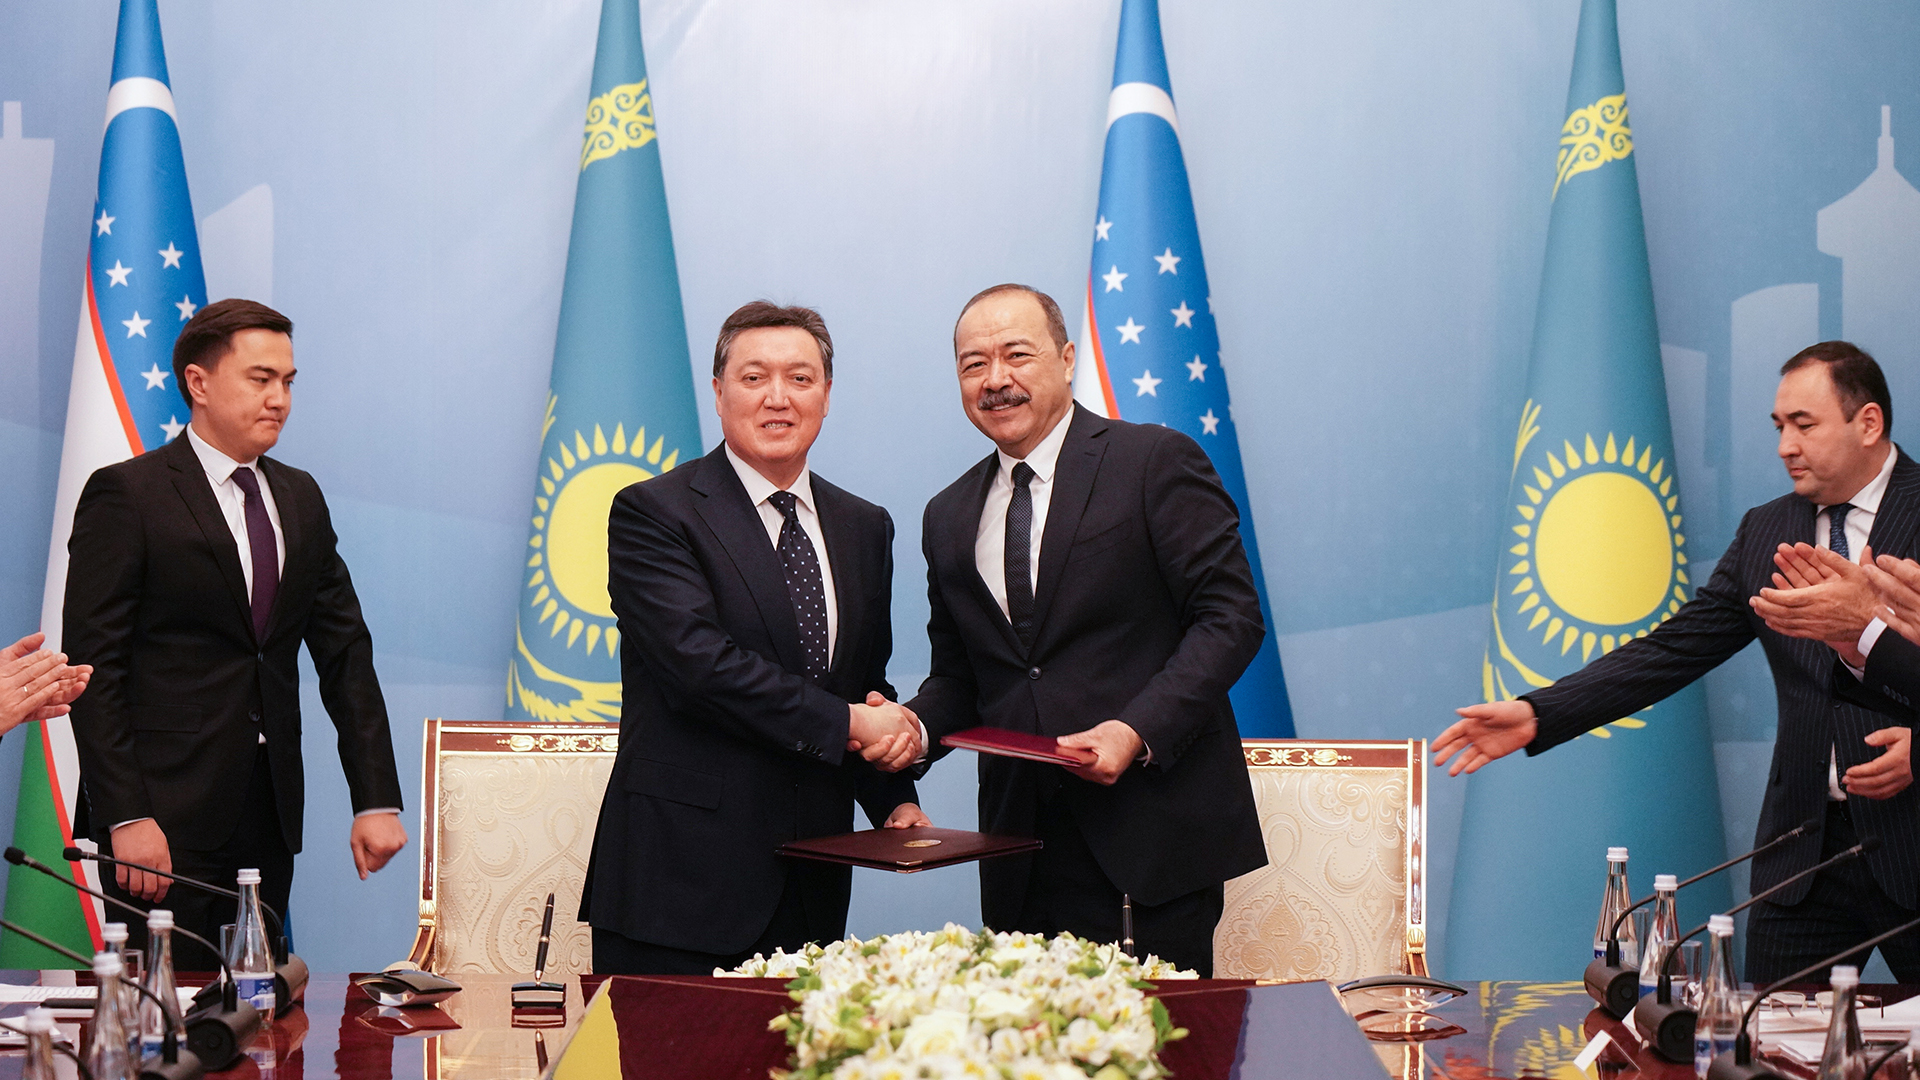 Fifty-two agreements worth about $500 million signed following II Forum of Interregional Cooperation between Kazakhstan and Uzbekistan